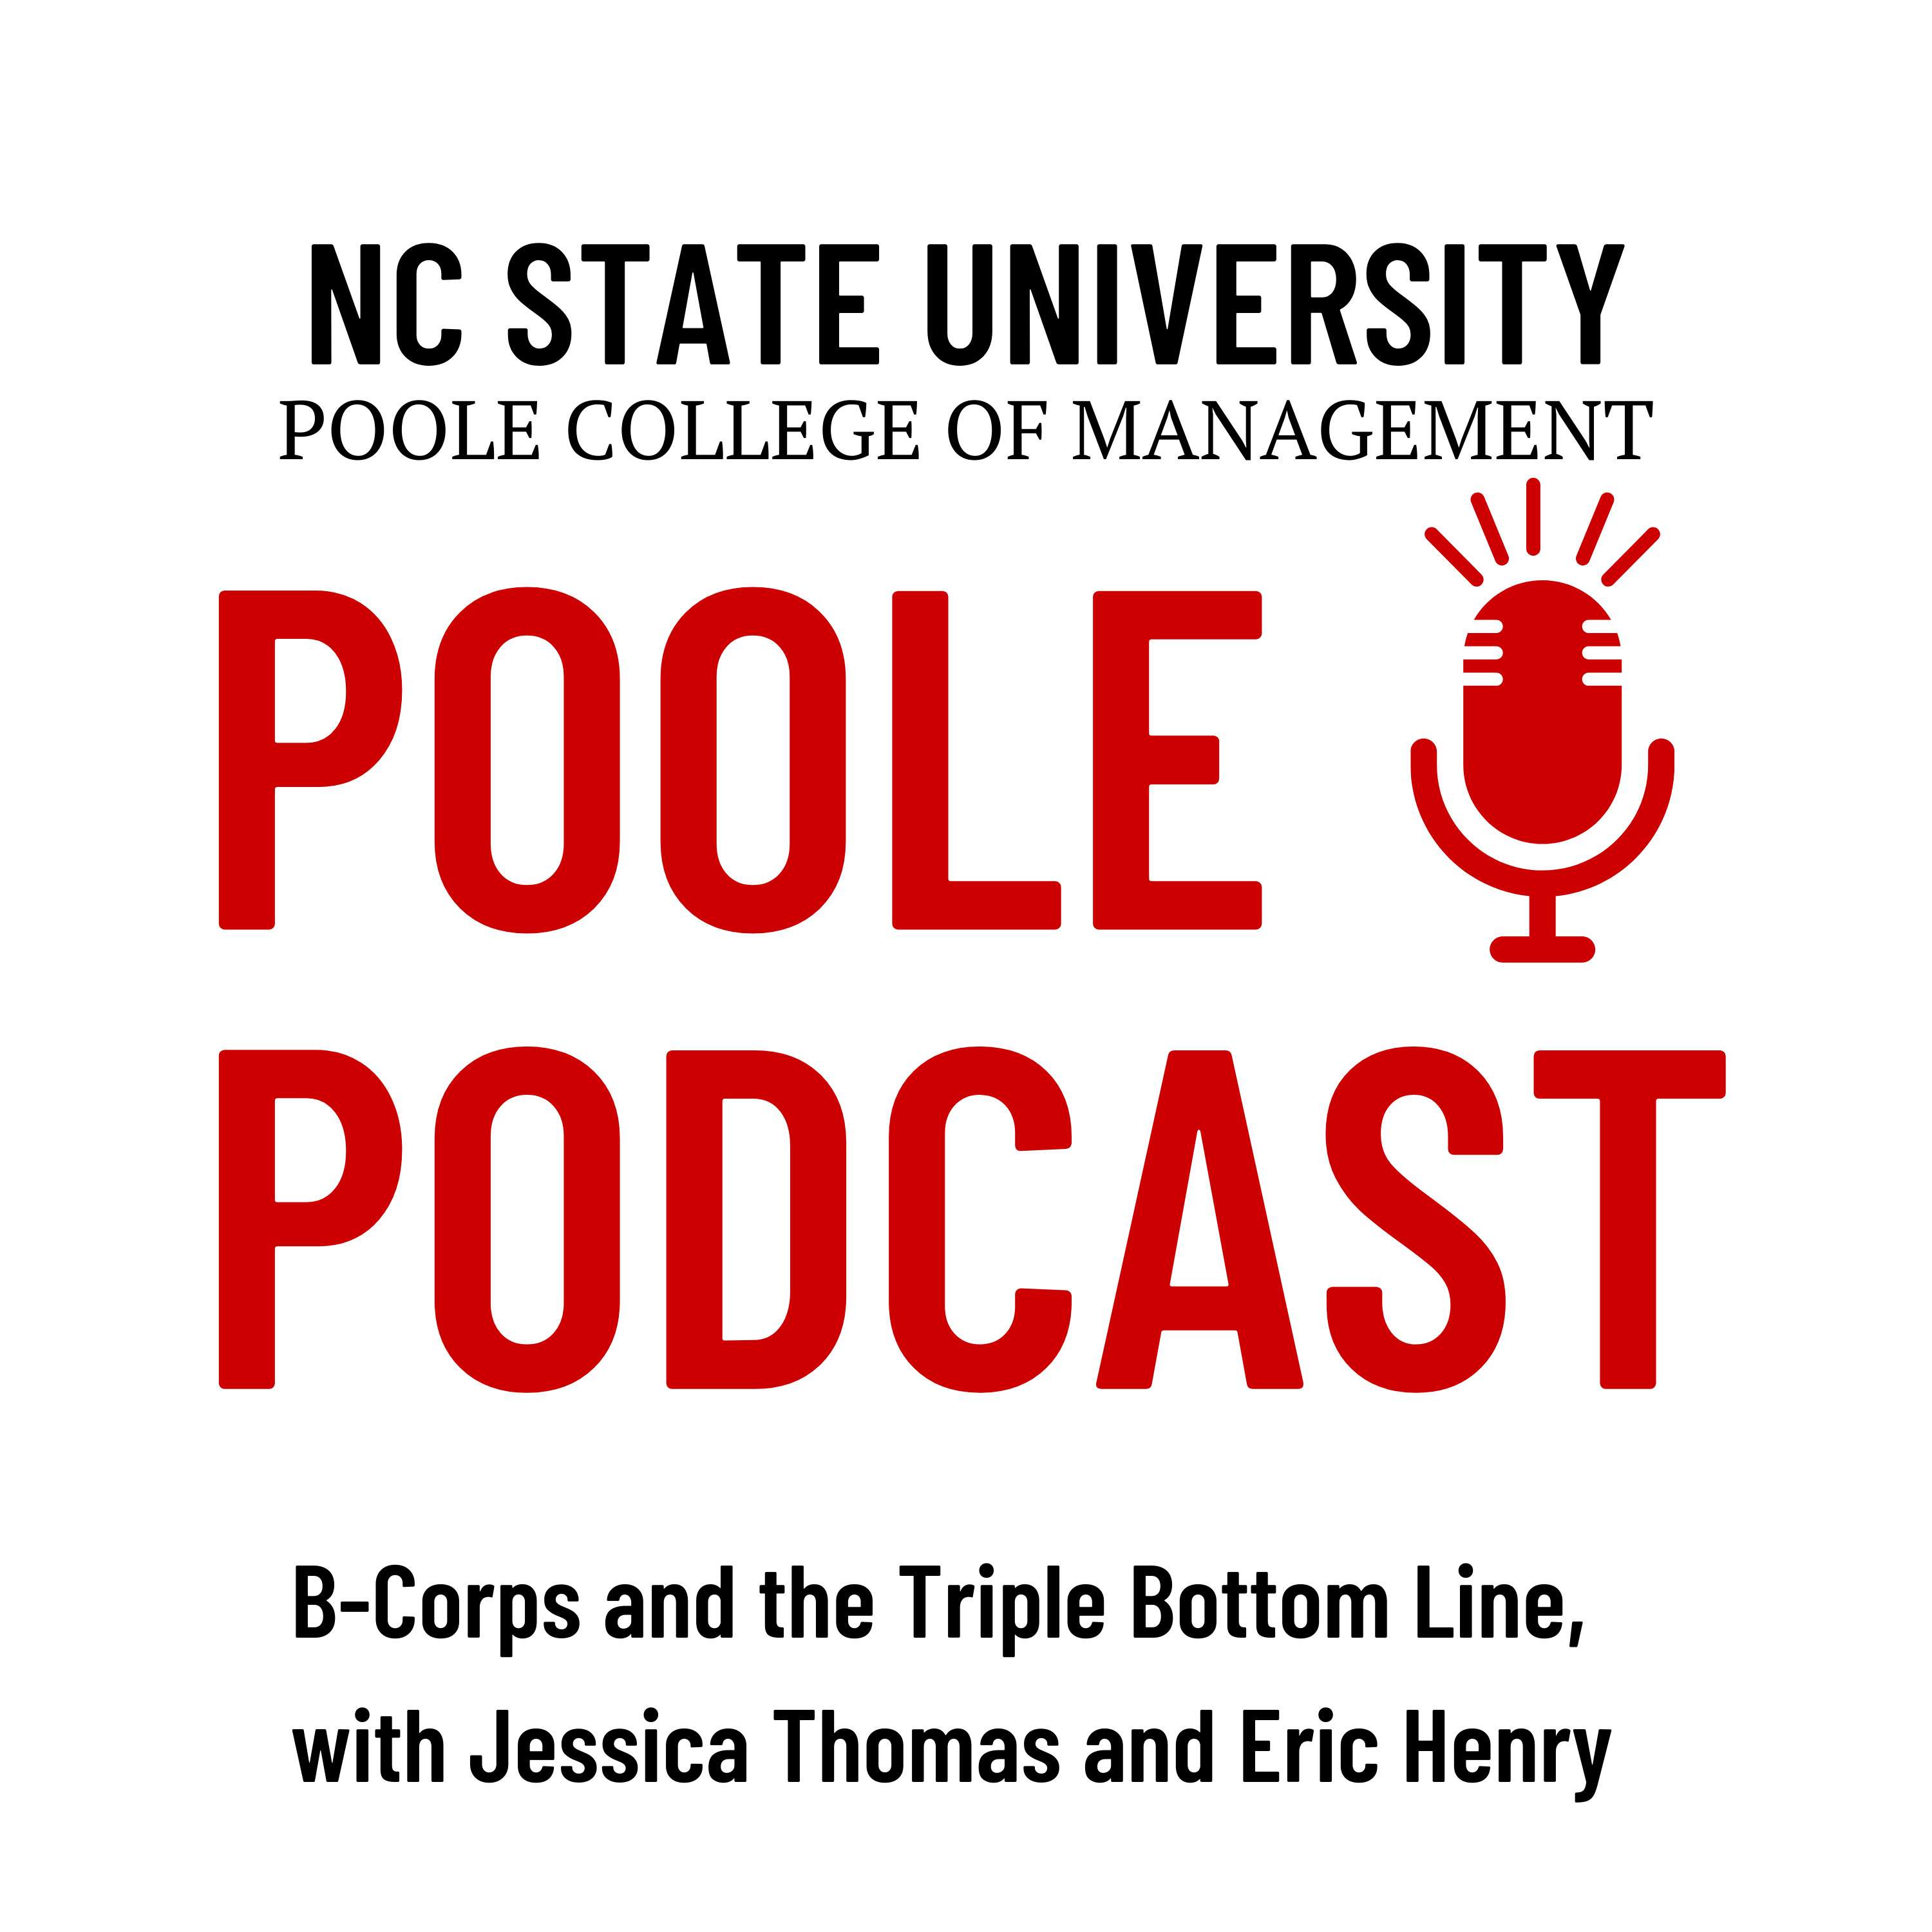 B-Corps and the Triple Bottom Line, with Jessica Thomas and Eric Henry